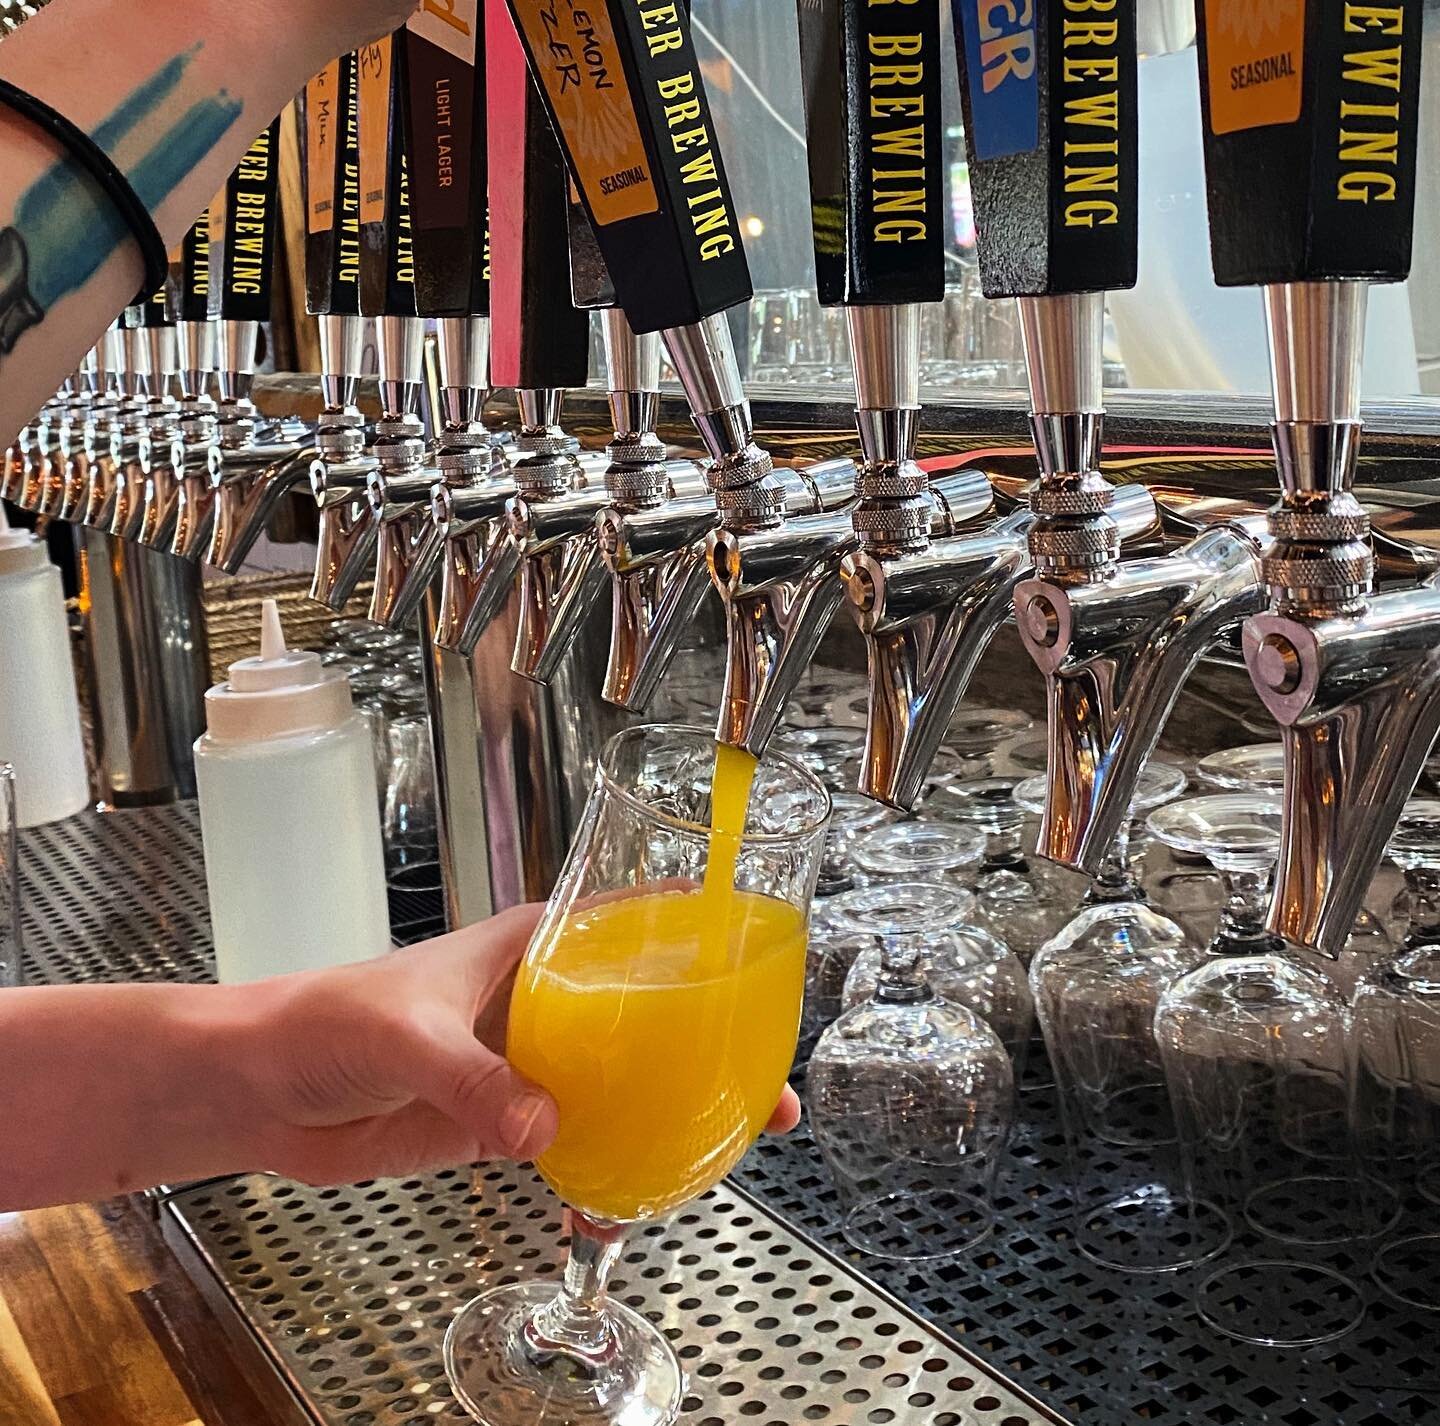 Cheers to making it half way through another week!
.
.
.
@yellowhammer_brewing 
.
.
.
#DHI #CraftBeer #CraftBeerTrail #DrinkLocal #DrinkBeer #ExploreDowntown #visithuntsville #supportlocal #localbreweries #localbrews